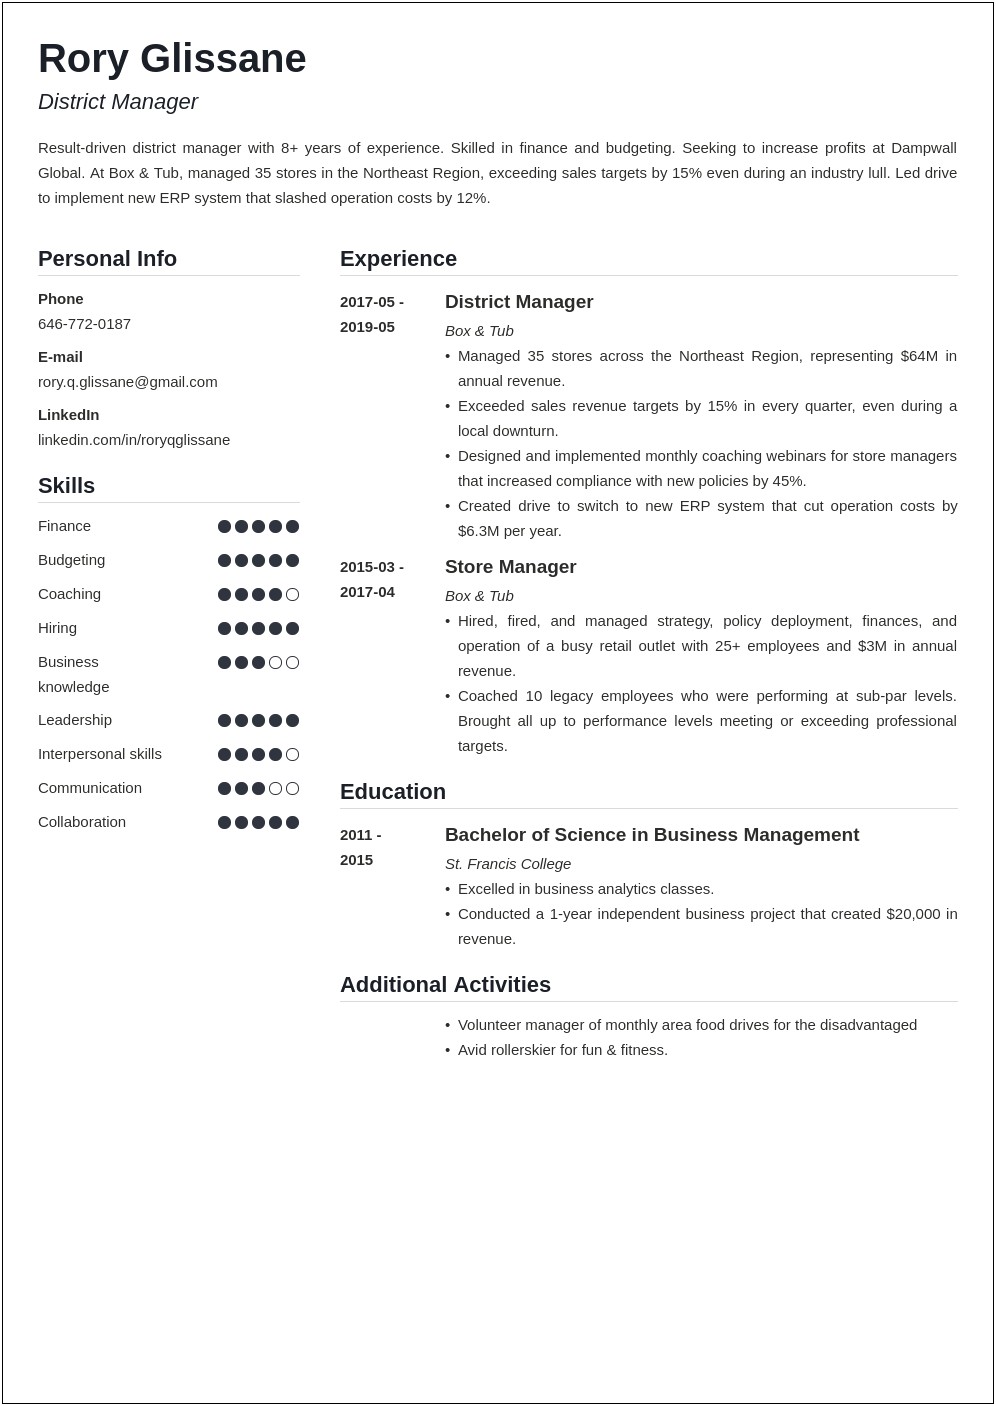 Examples Of Restaurant District Manager Resumes